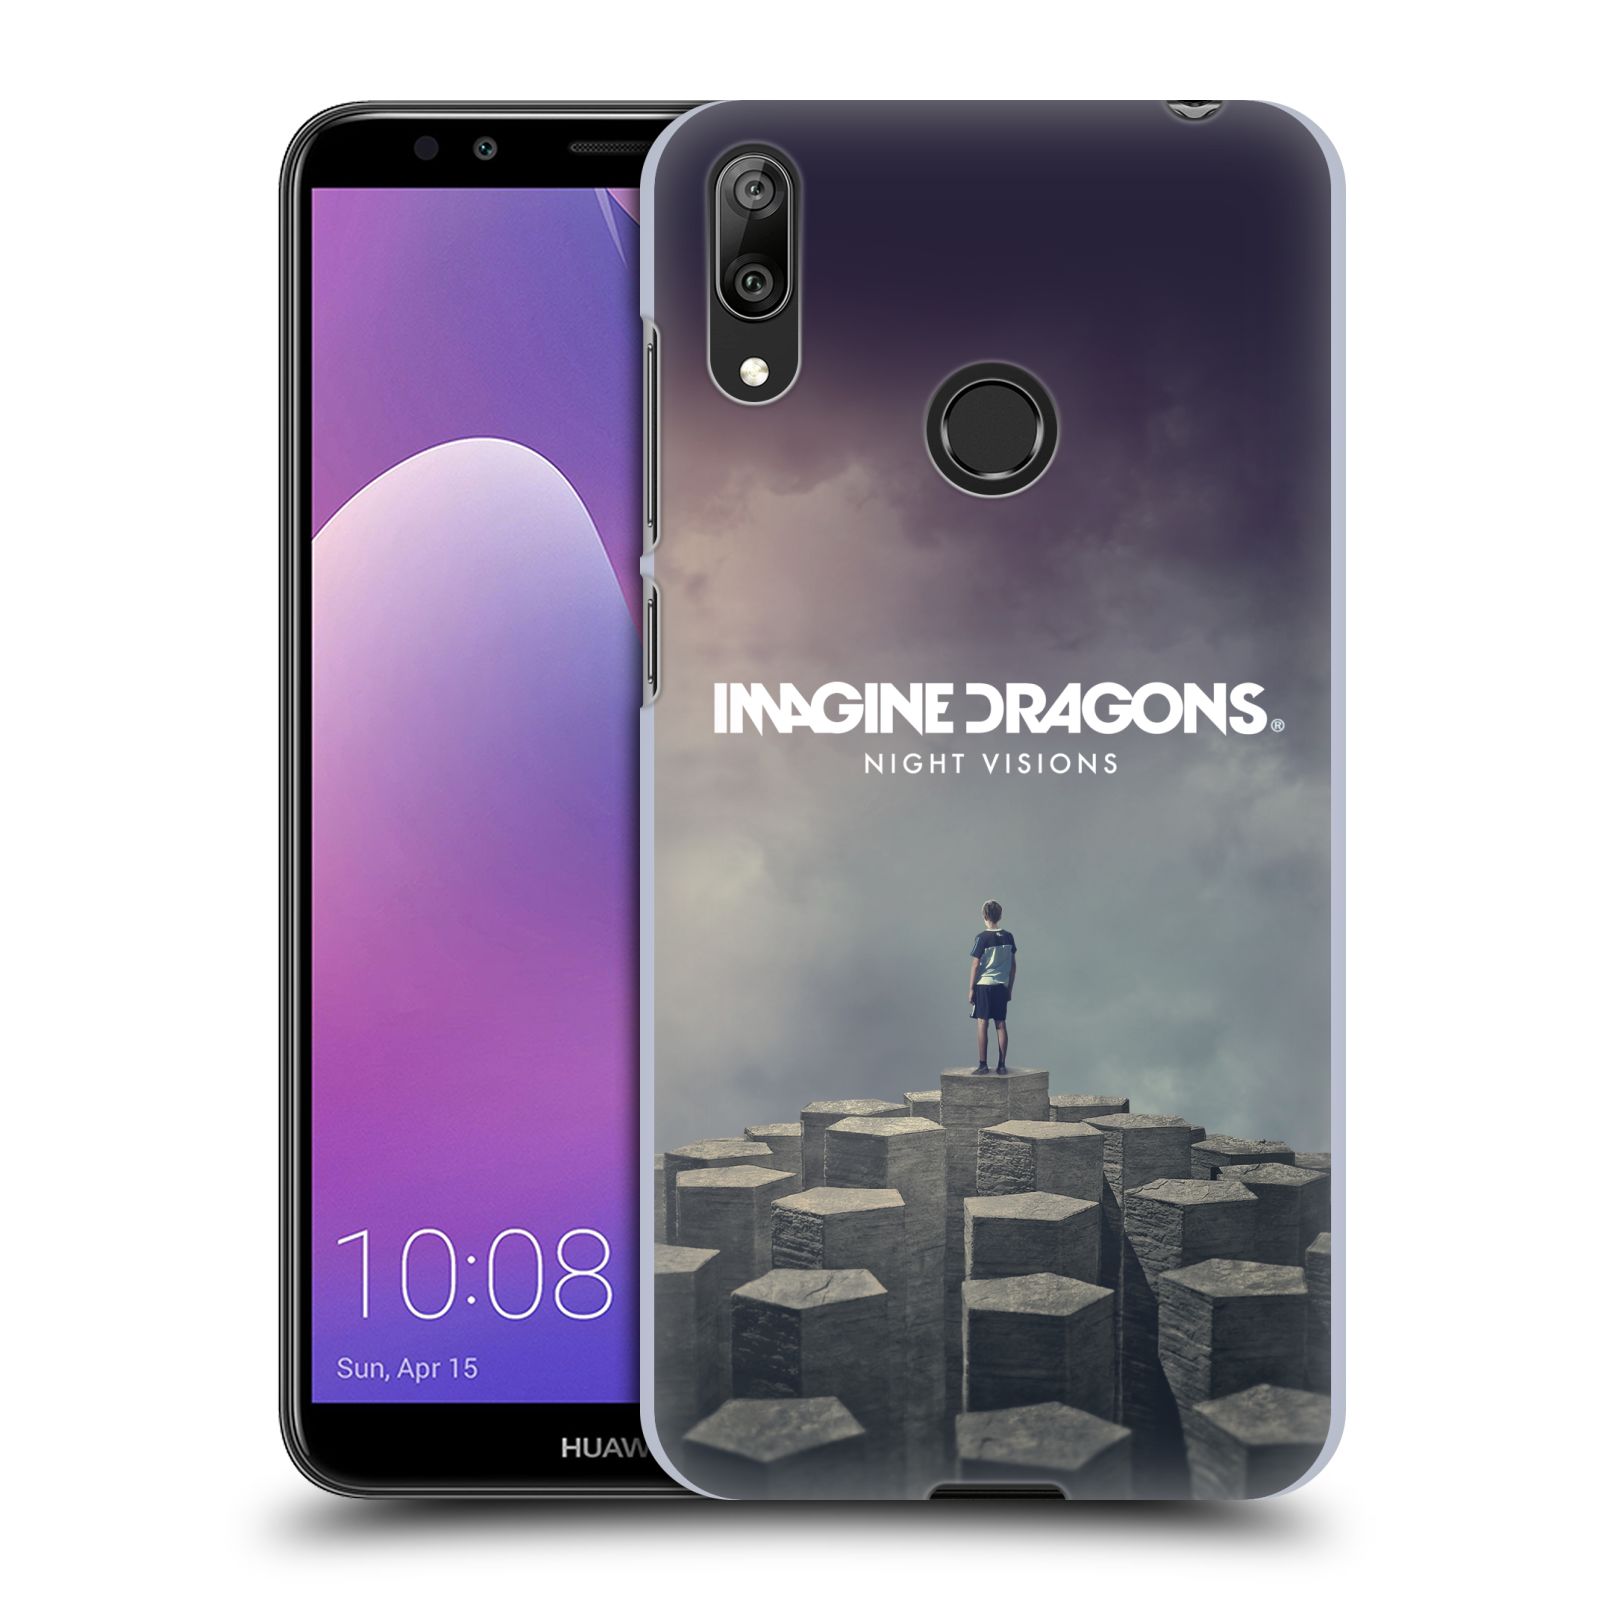 Pouzdro na mobil Huawei Y7 2019 - Head Case - hudební skupina Imagine Dragons Night Visions